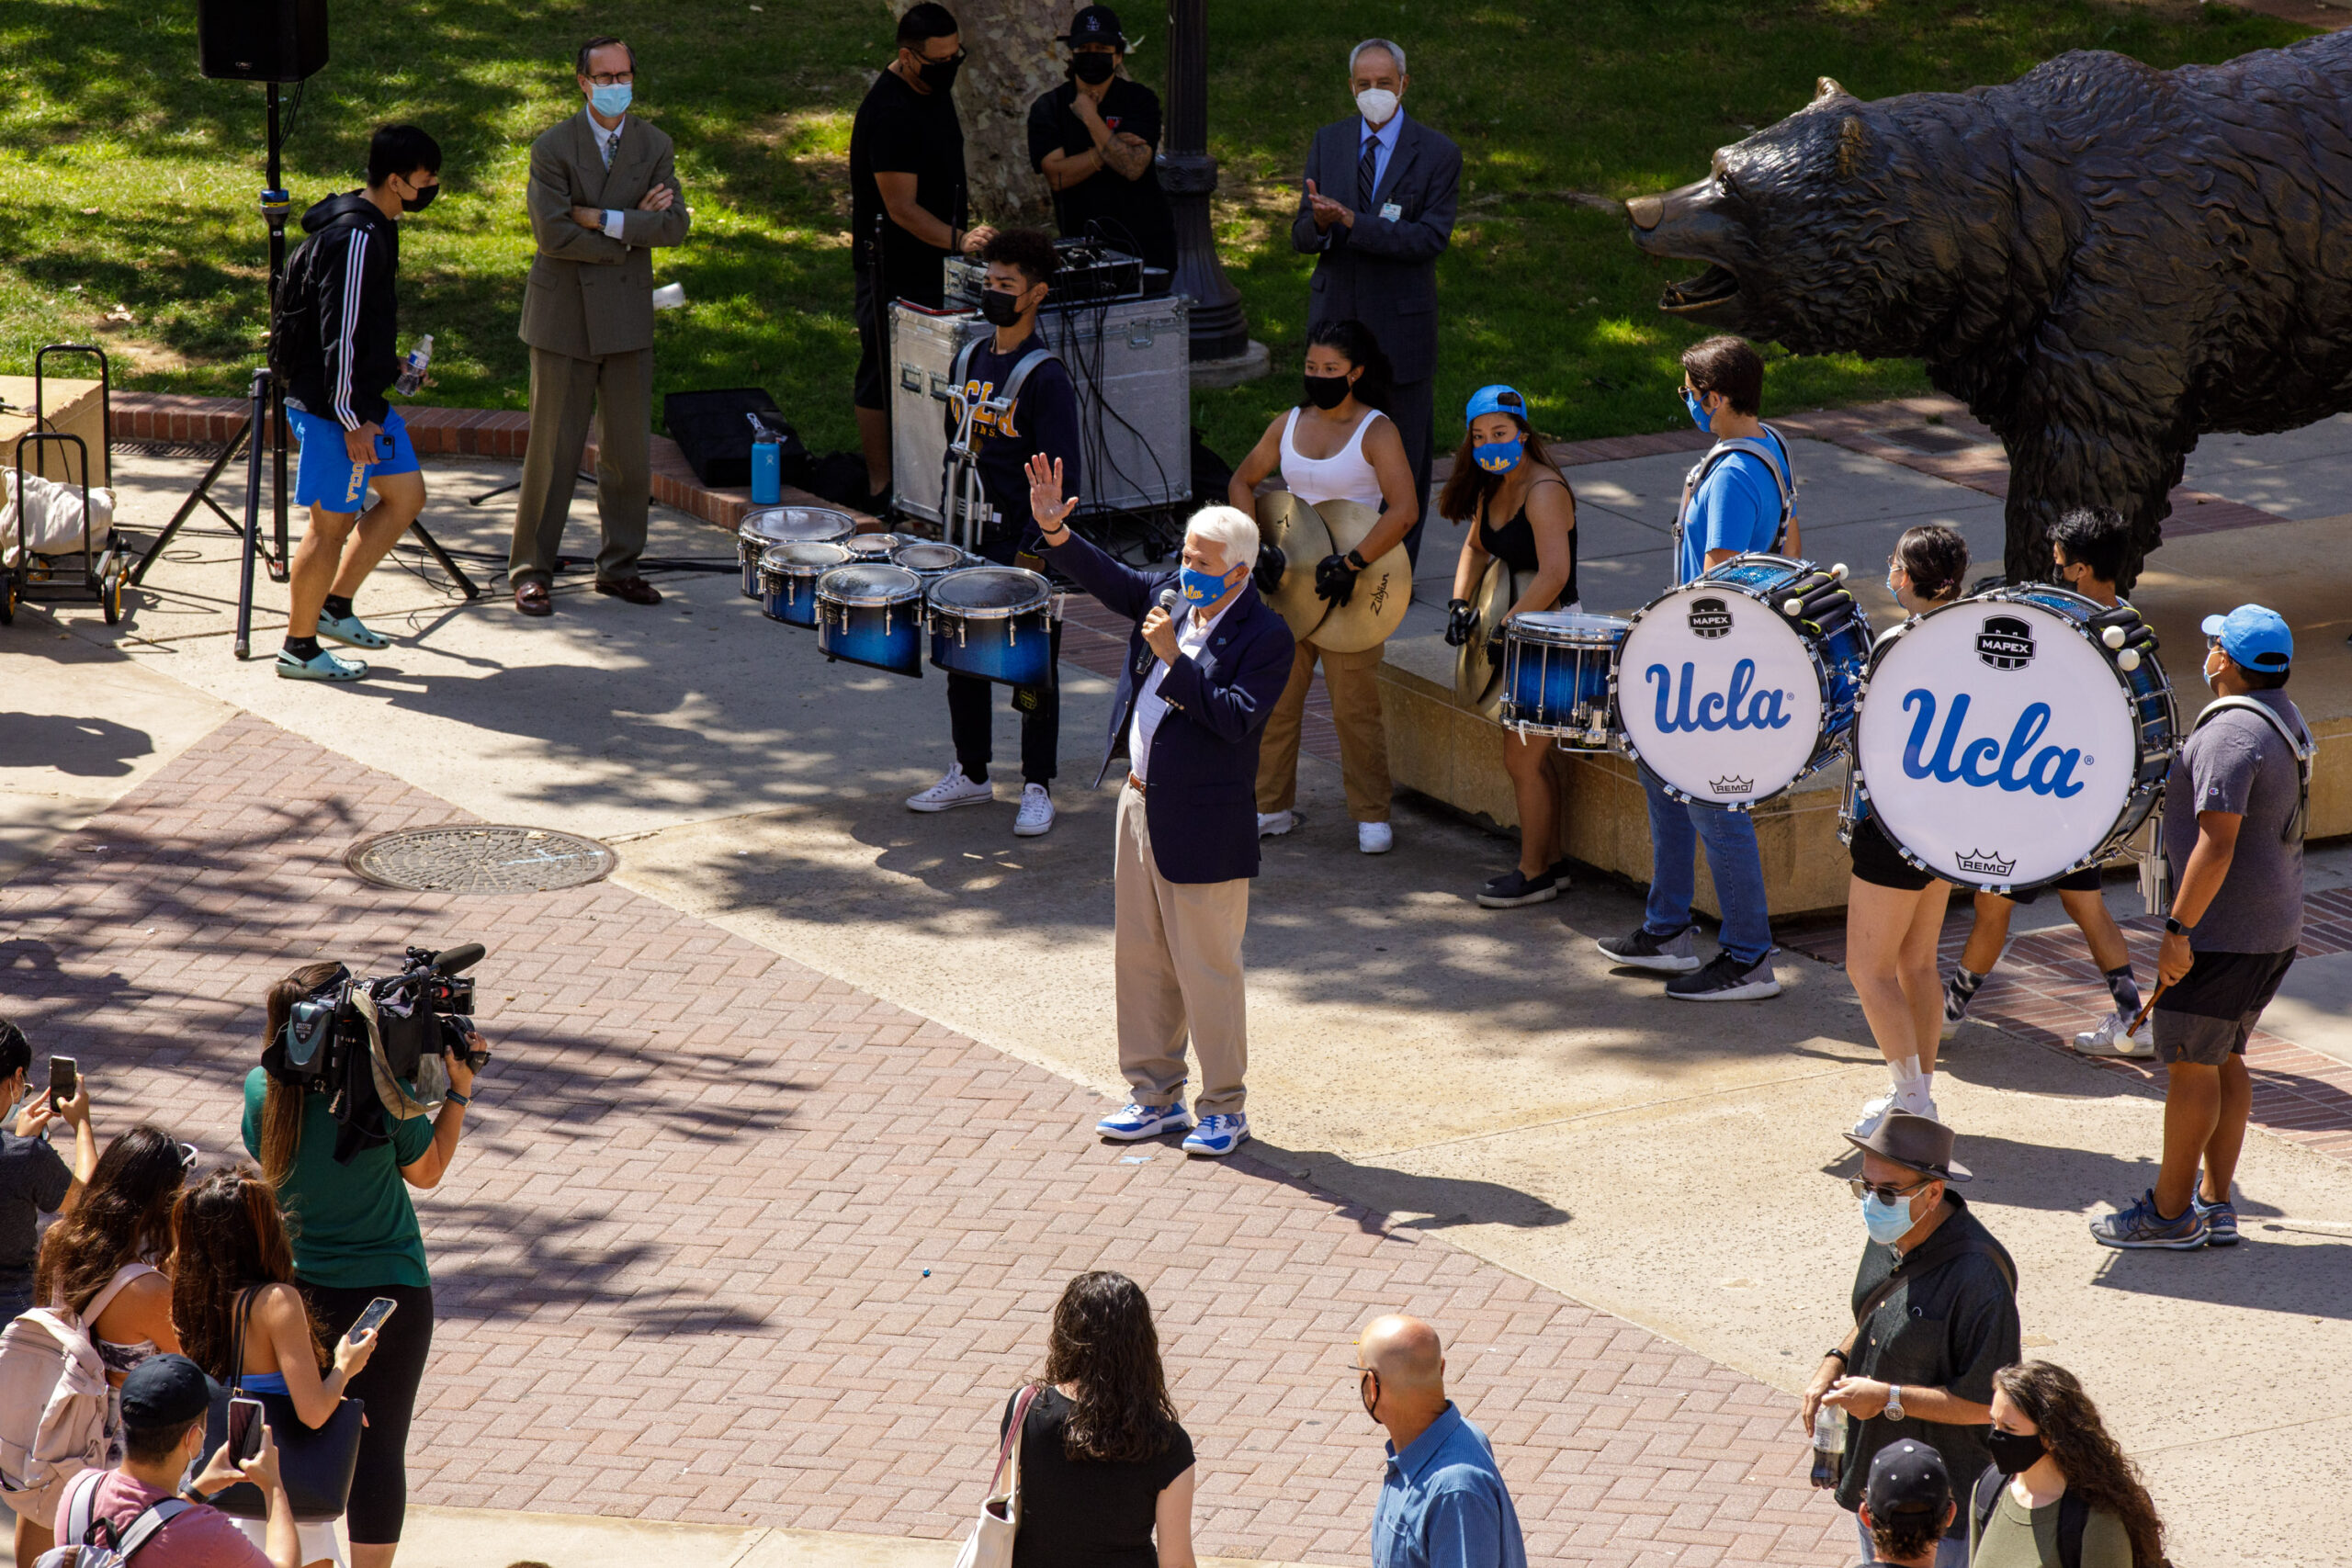 A masked grey haired man holds a microphone and raises his hand. A small crowd point cameras towards him. Behind Block, UCLA drummers and staff wrap around the Bruin statue.